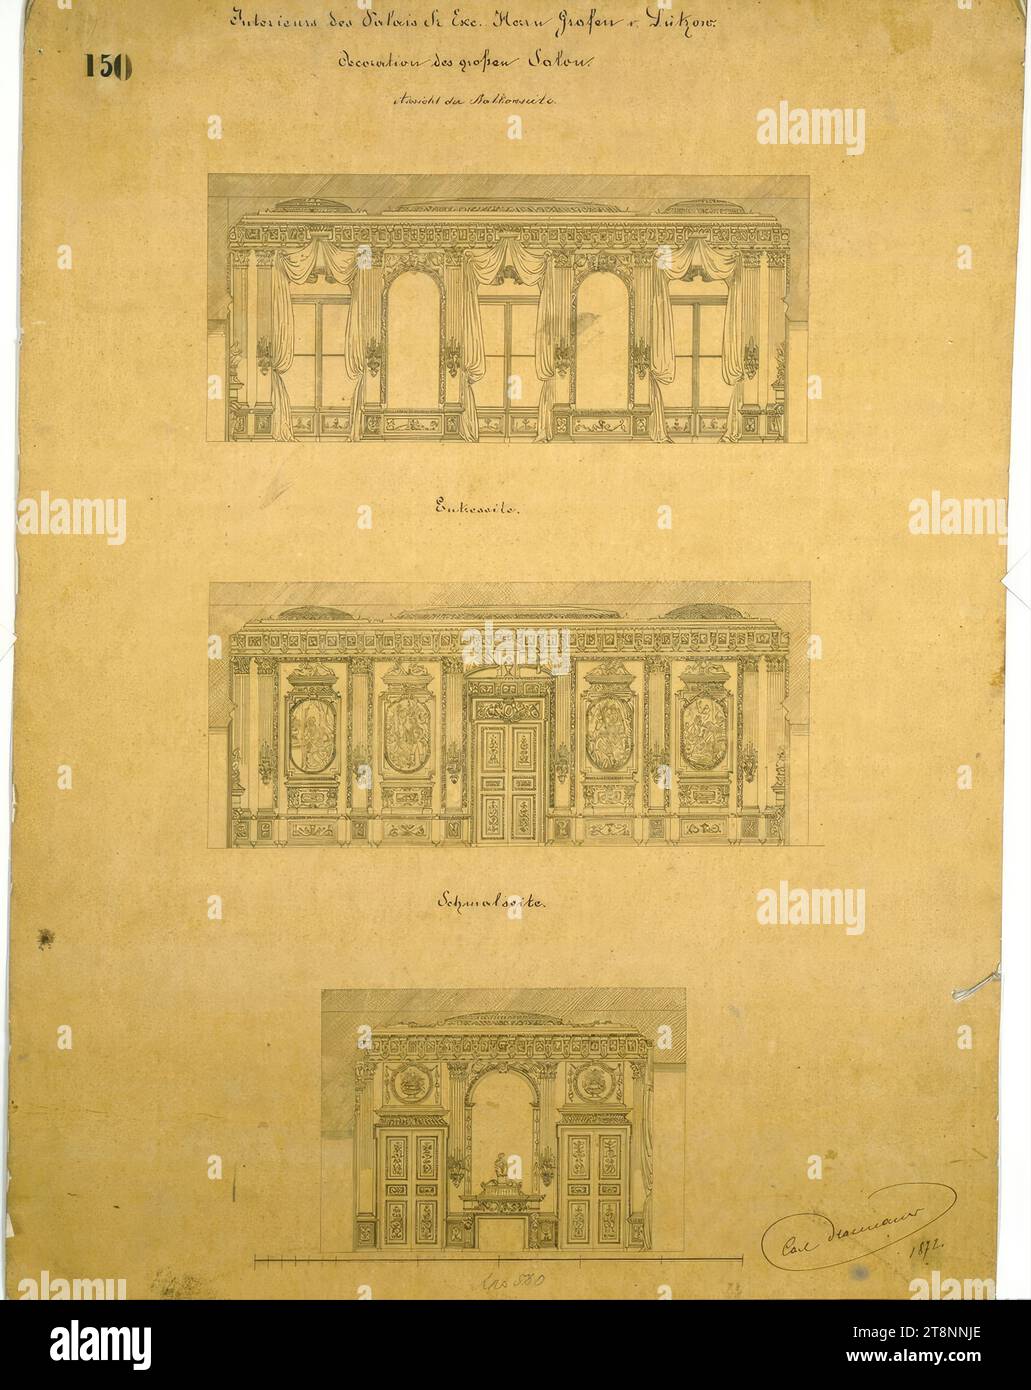 Vienna I, Bösendorferstraße 13, Palais Lützow, 1st floor, large salon, wall development, cuts, Carl von Hasenauer (Vienna 1833 - 1894 Vienna), 1872, architectural drawing, tracing paper on paper, pen and ink in black, 646 x 485 mm, '150 ', 'Interiors of the Palais Sr. Exc. Mr. Count v. Lützow./ Decoration of the large salon (sic)./ View of the balcony side.', 'Entreseite (sic).', 'Narrow side.', 'From 580 Stock Photo